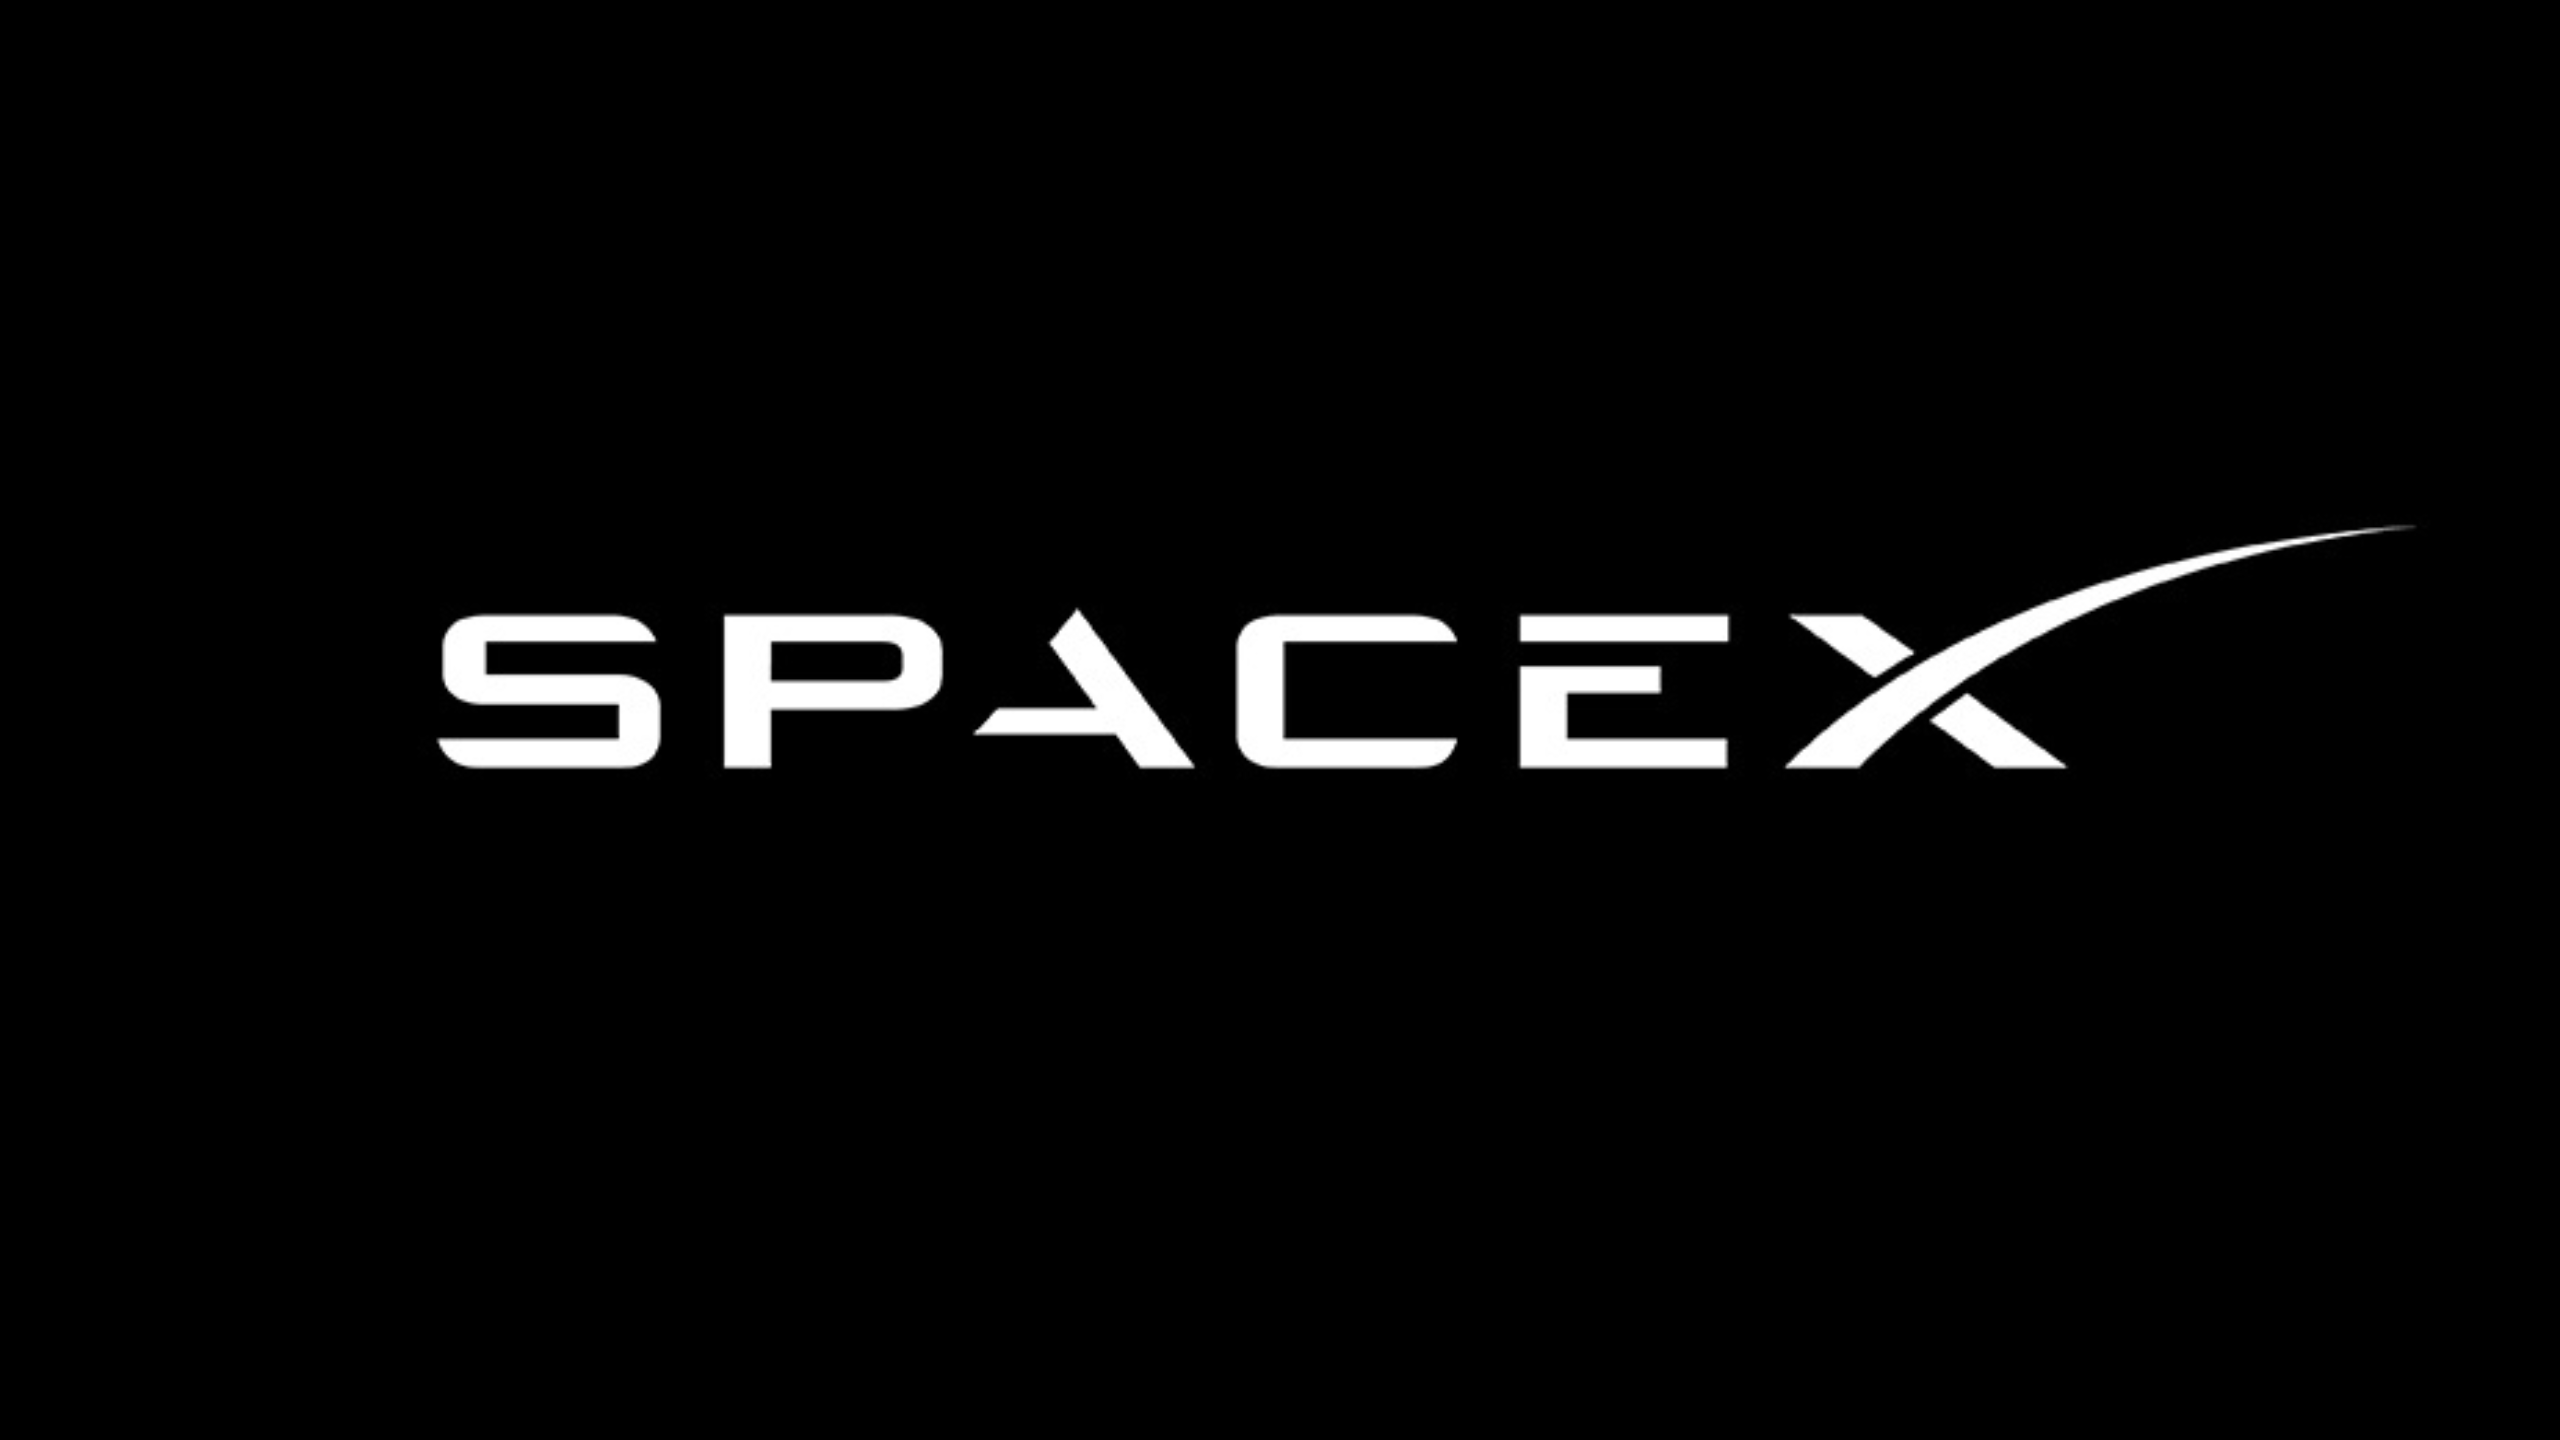 SpaceX threw its annual 2022 holiday parties and was a hit on TikTok